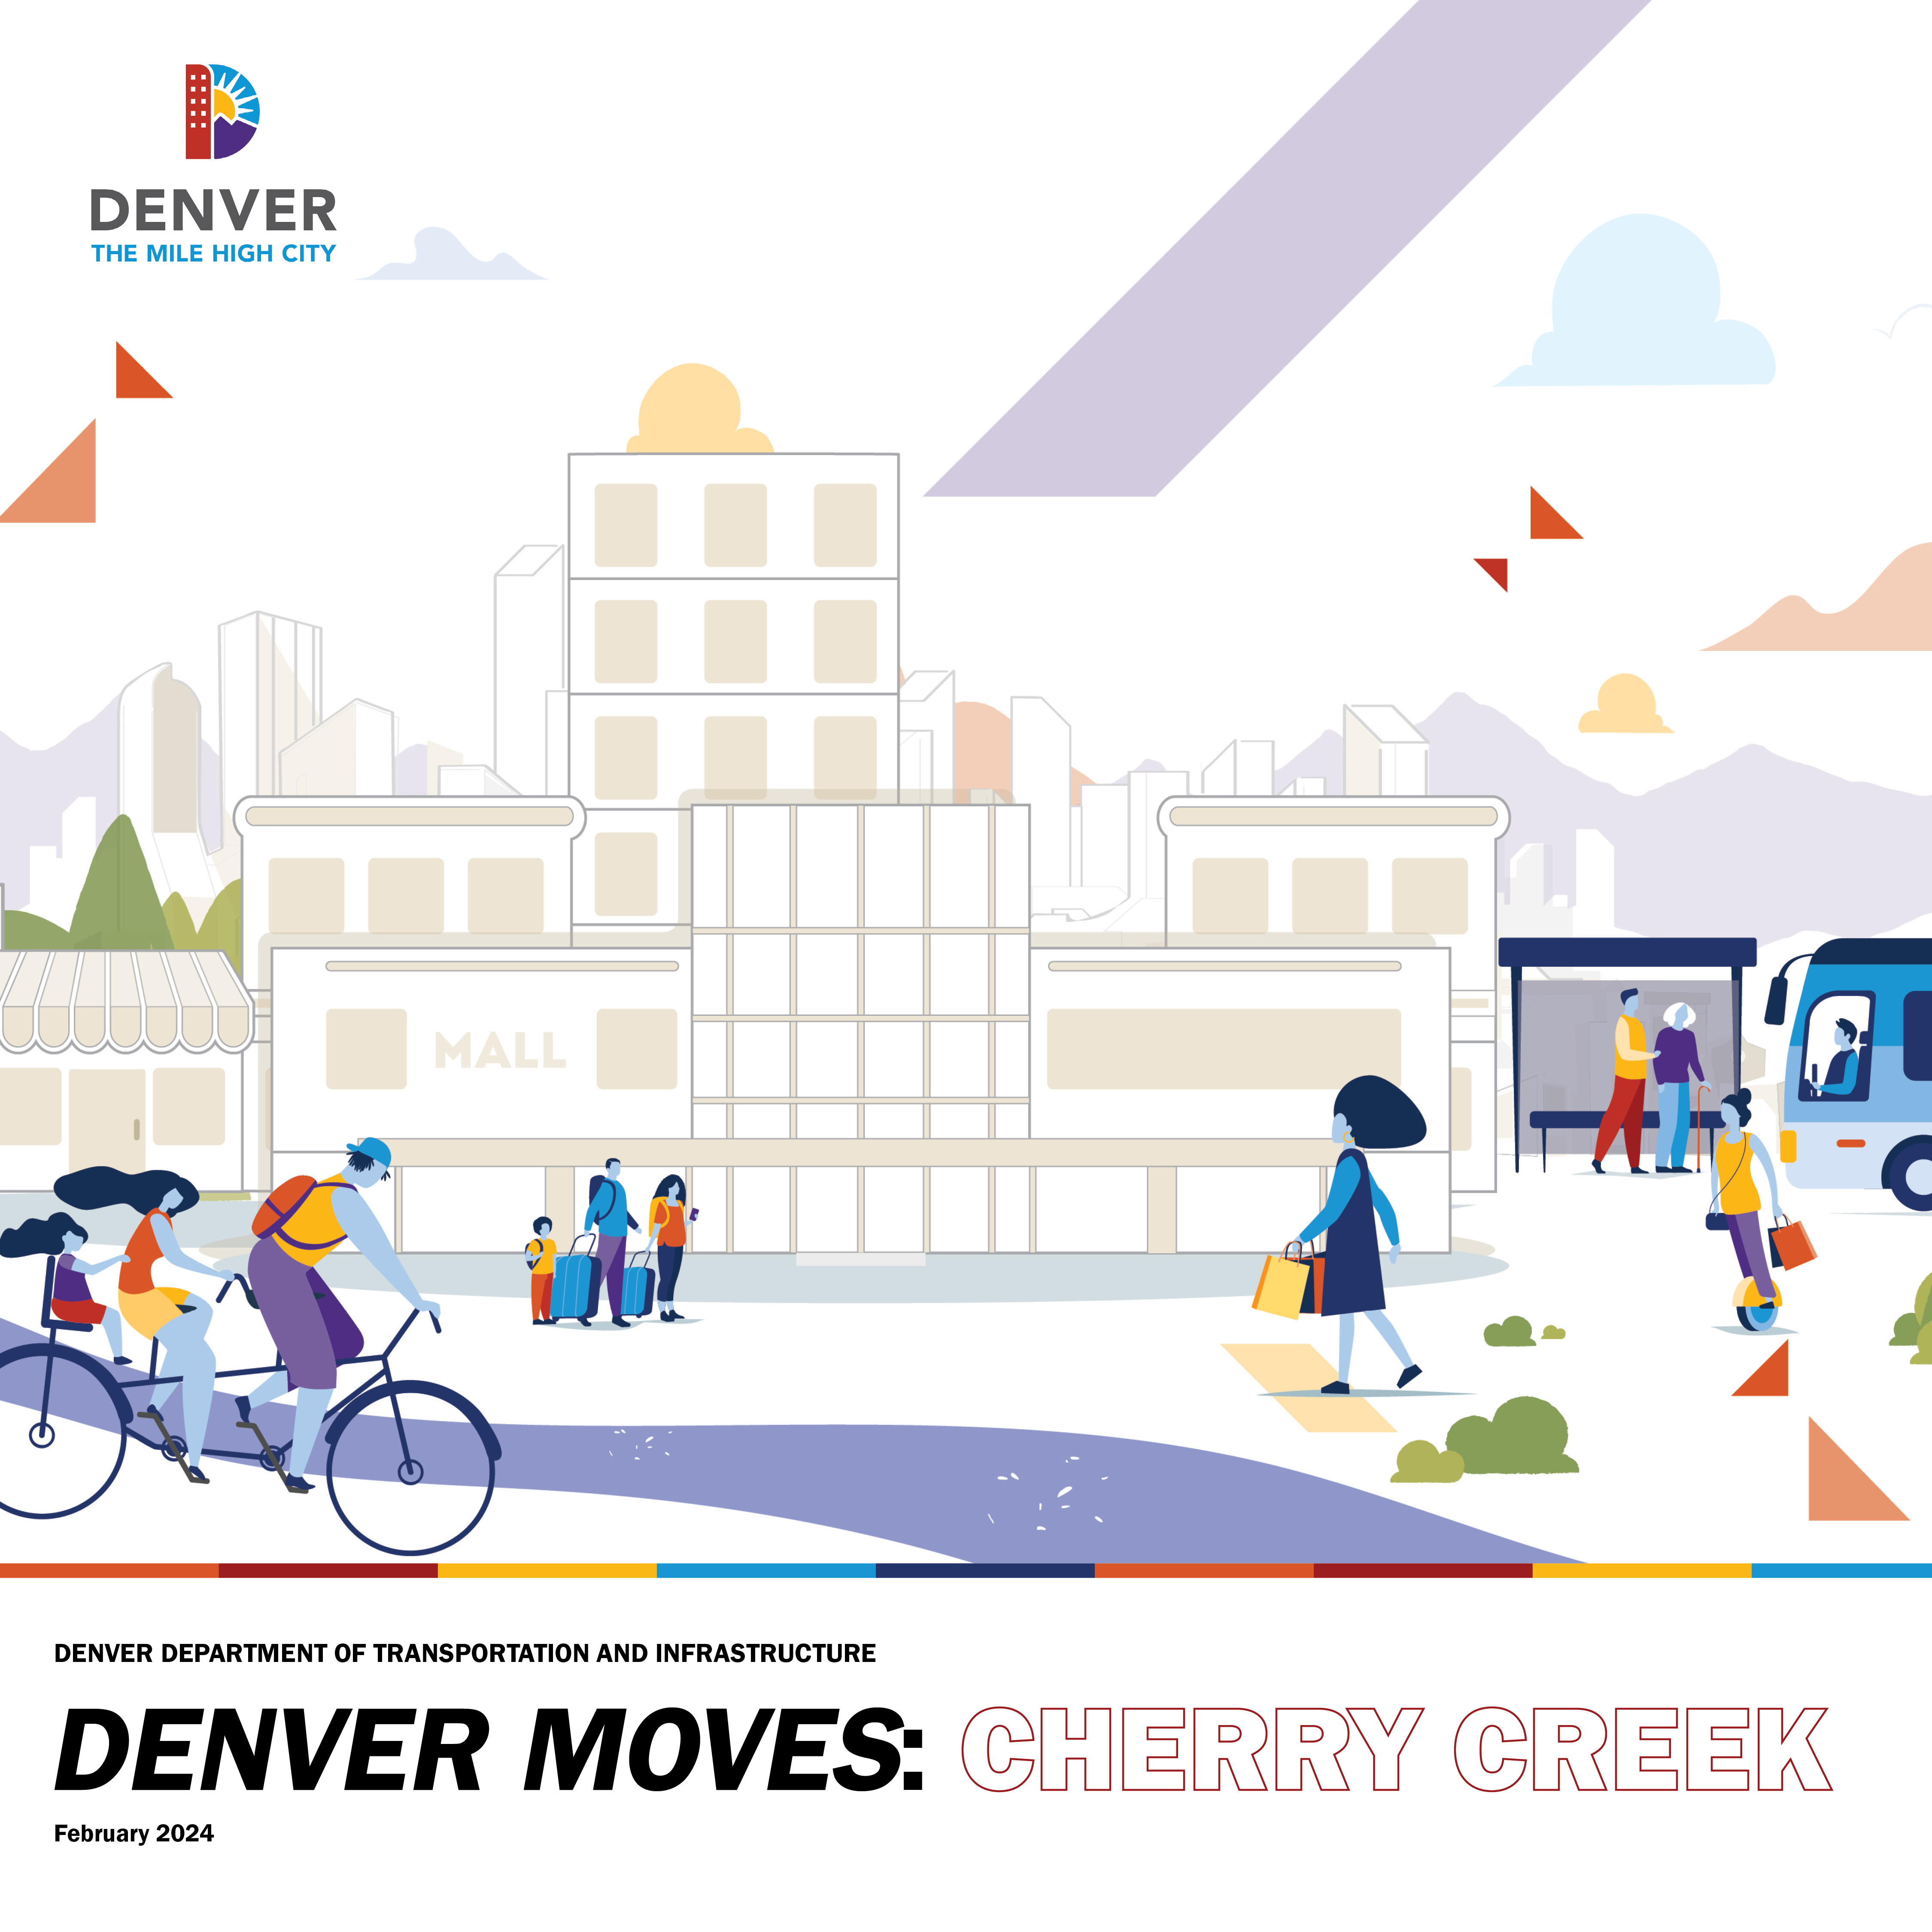 The Denver Moves: Cherry Creek plan is complete!